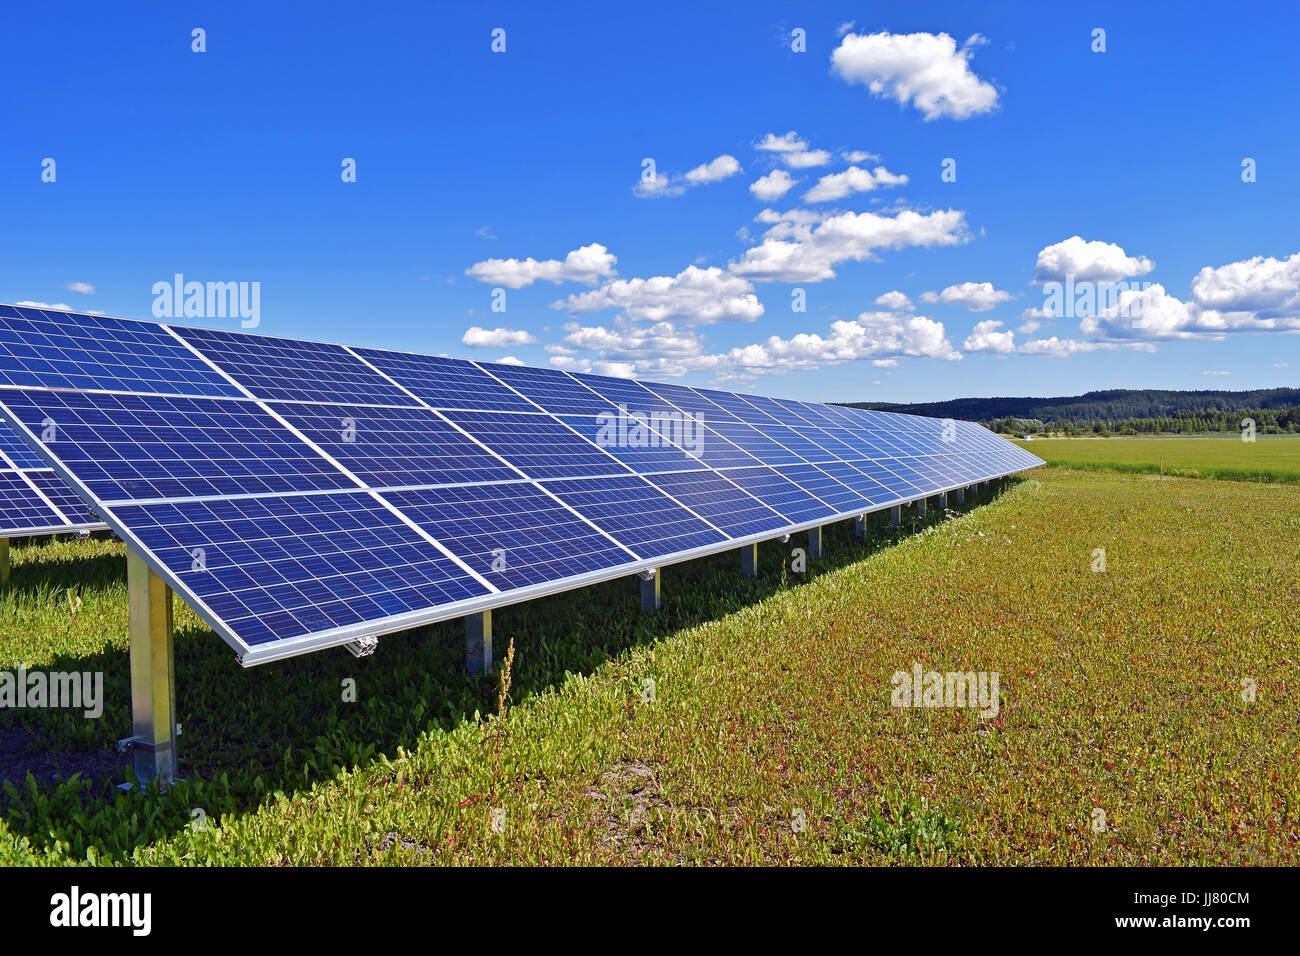 Solar panels on field. Clear sky with a few small clouds on background. Stock Photo